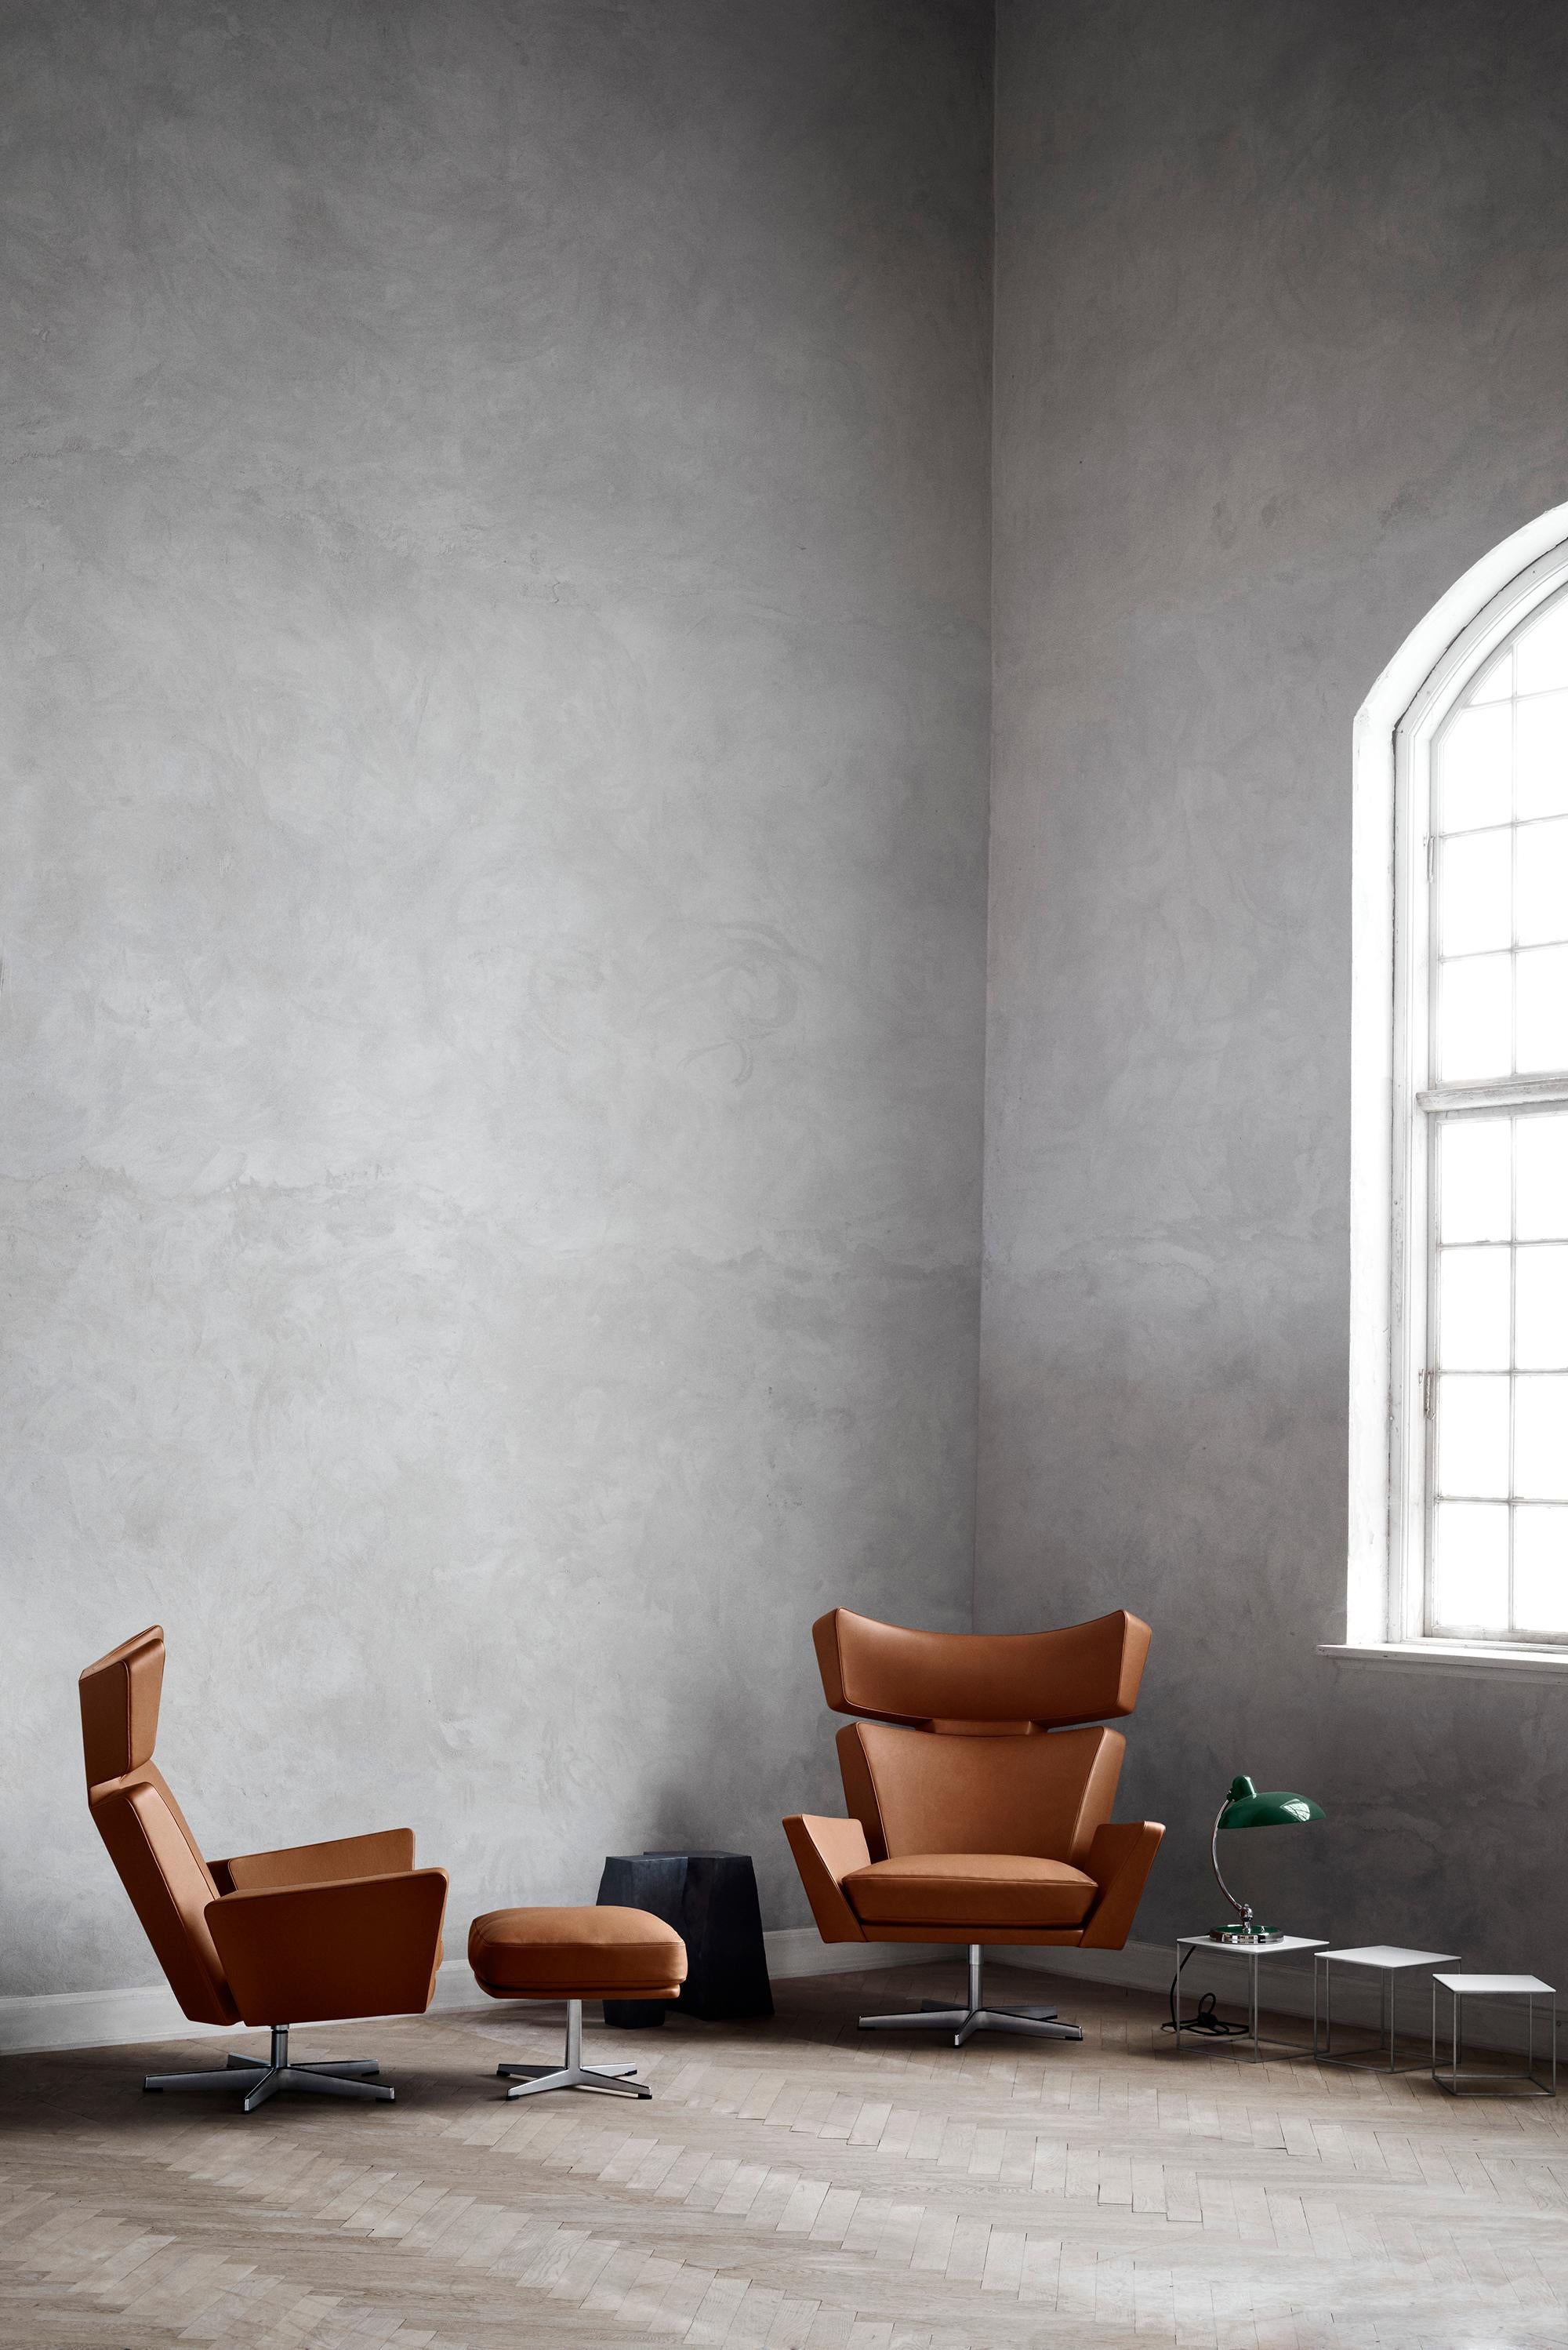 Arne Jacobsen 'Oksen' Chair for Fritz Hansen in Grace Leather Upholstery.

Established in 1872, Fritz Hansen has become synonymous with legendary Danish design. Combining timeless craftsmanship with an emphasis on sustainability, the brand’s